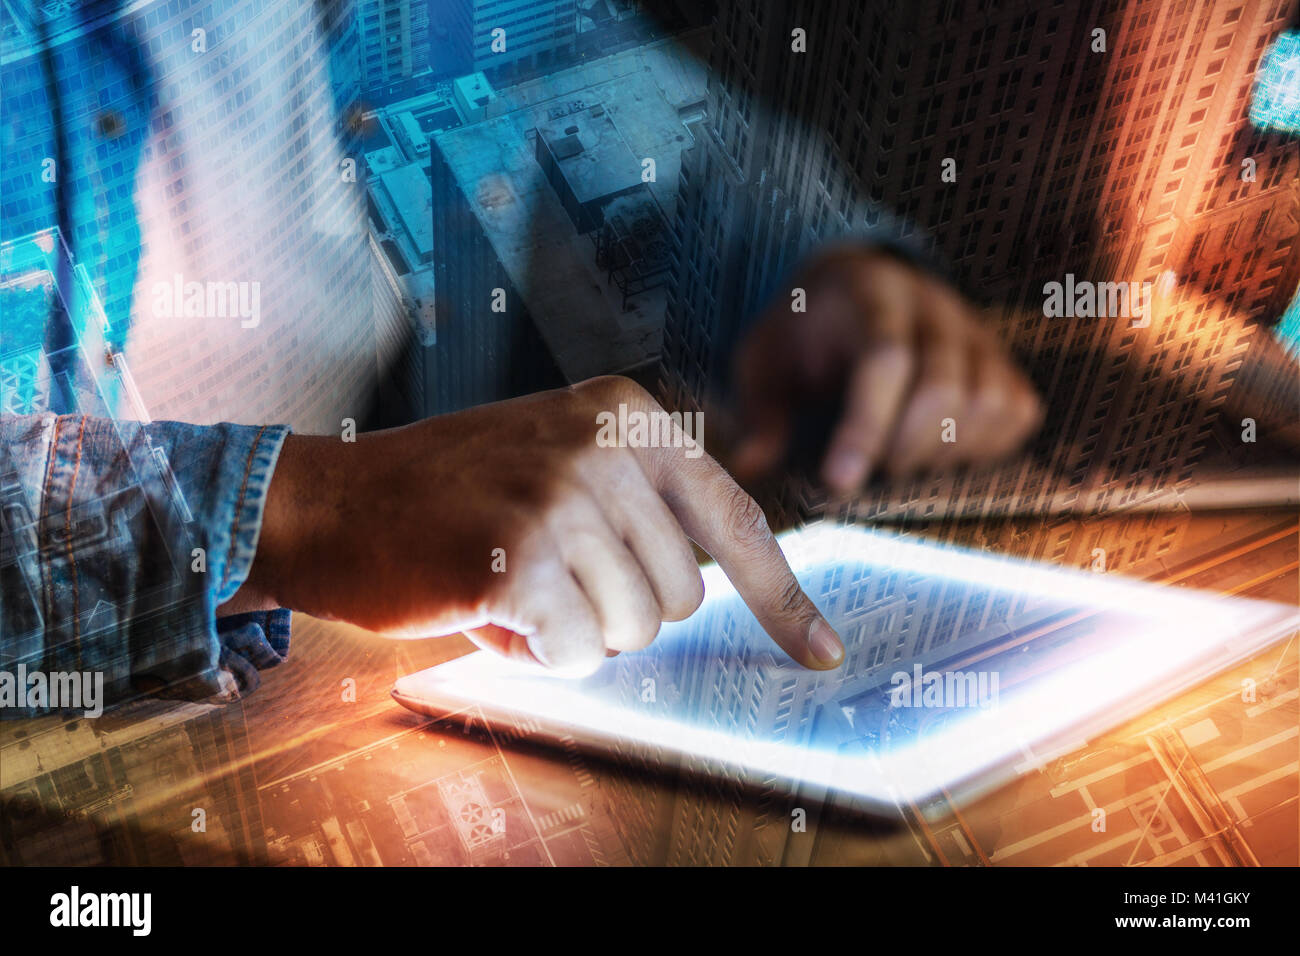 Young person touching the screen of a tablet while working Stock Photo